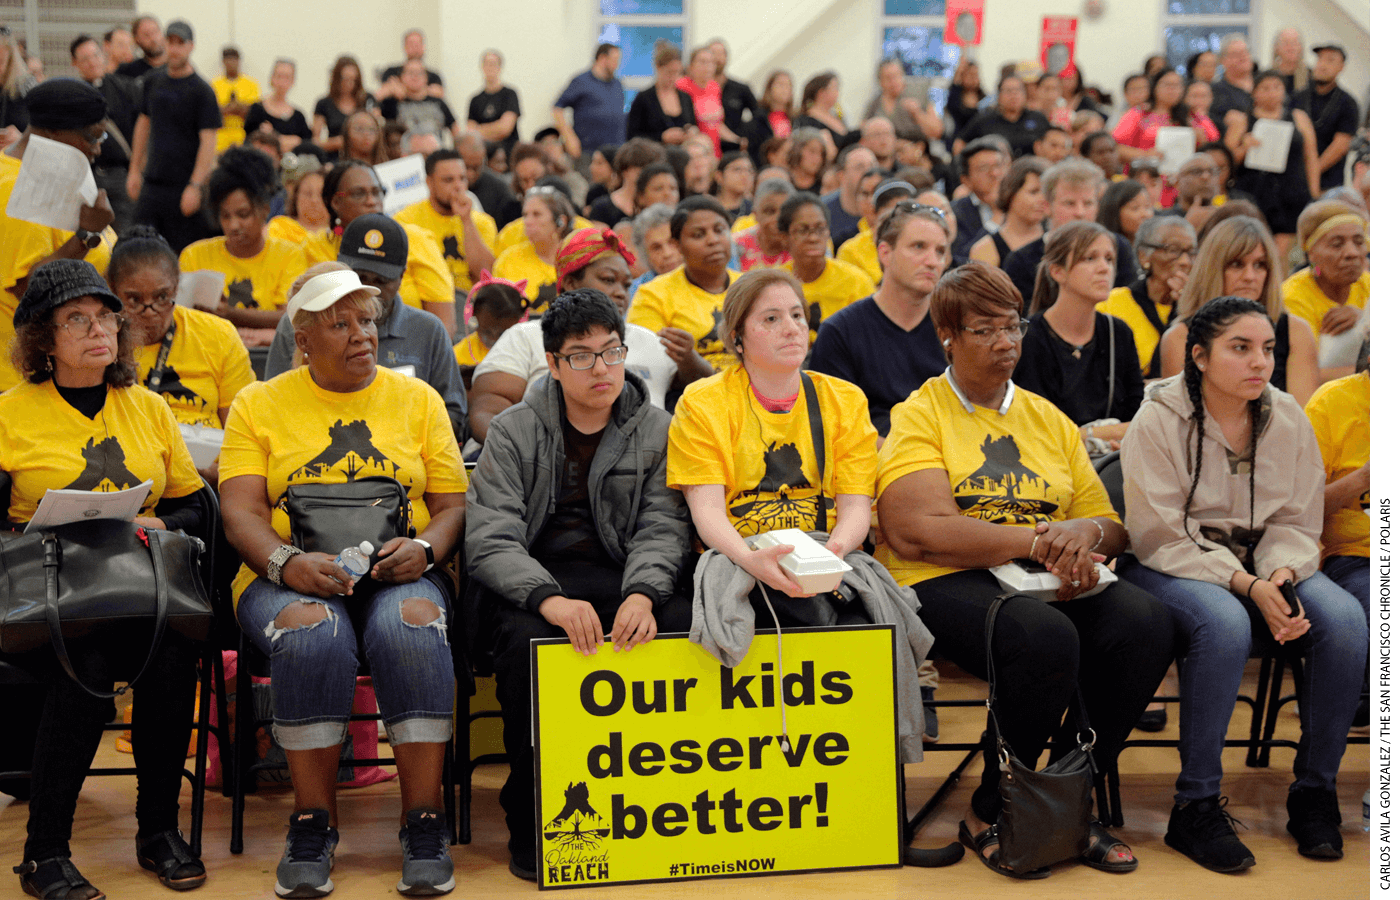 In 2019, parents opposed to a proposed merger of several elementary schools in Oakland, California, attended an Oakland Unified School District board meeting. Attendees in yellow shirts, as well as the one holding a sign, were members of The Oakland REACH.